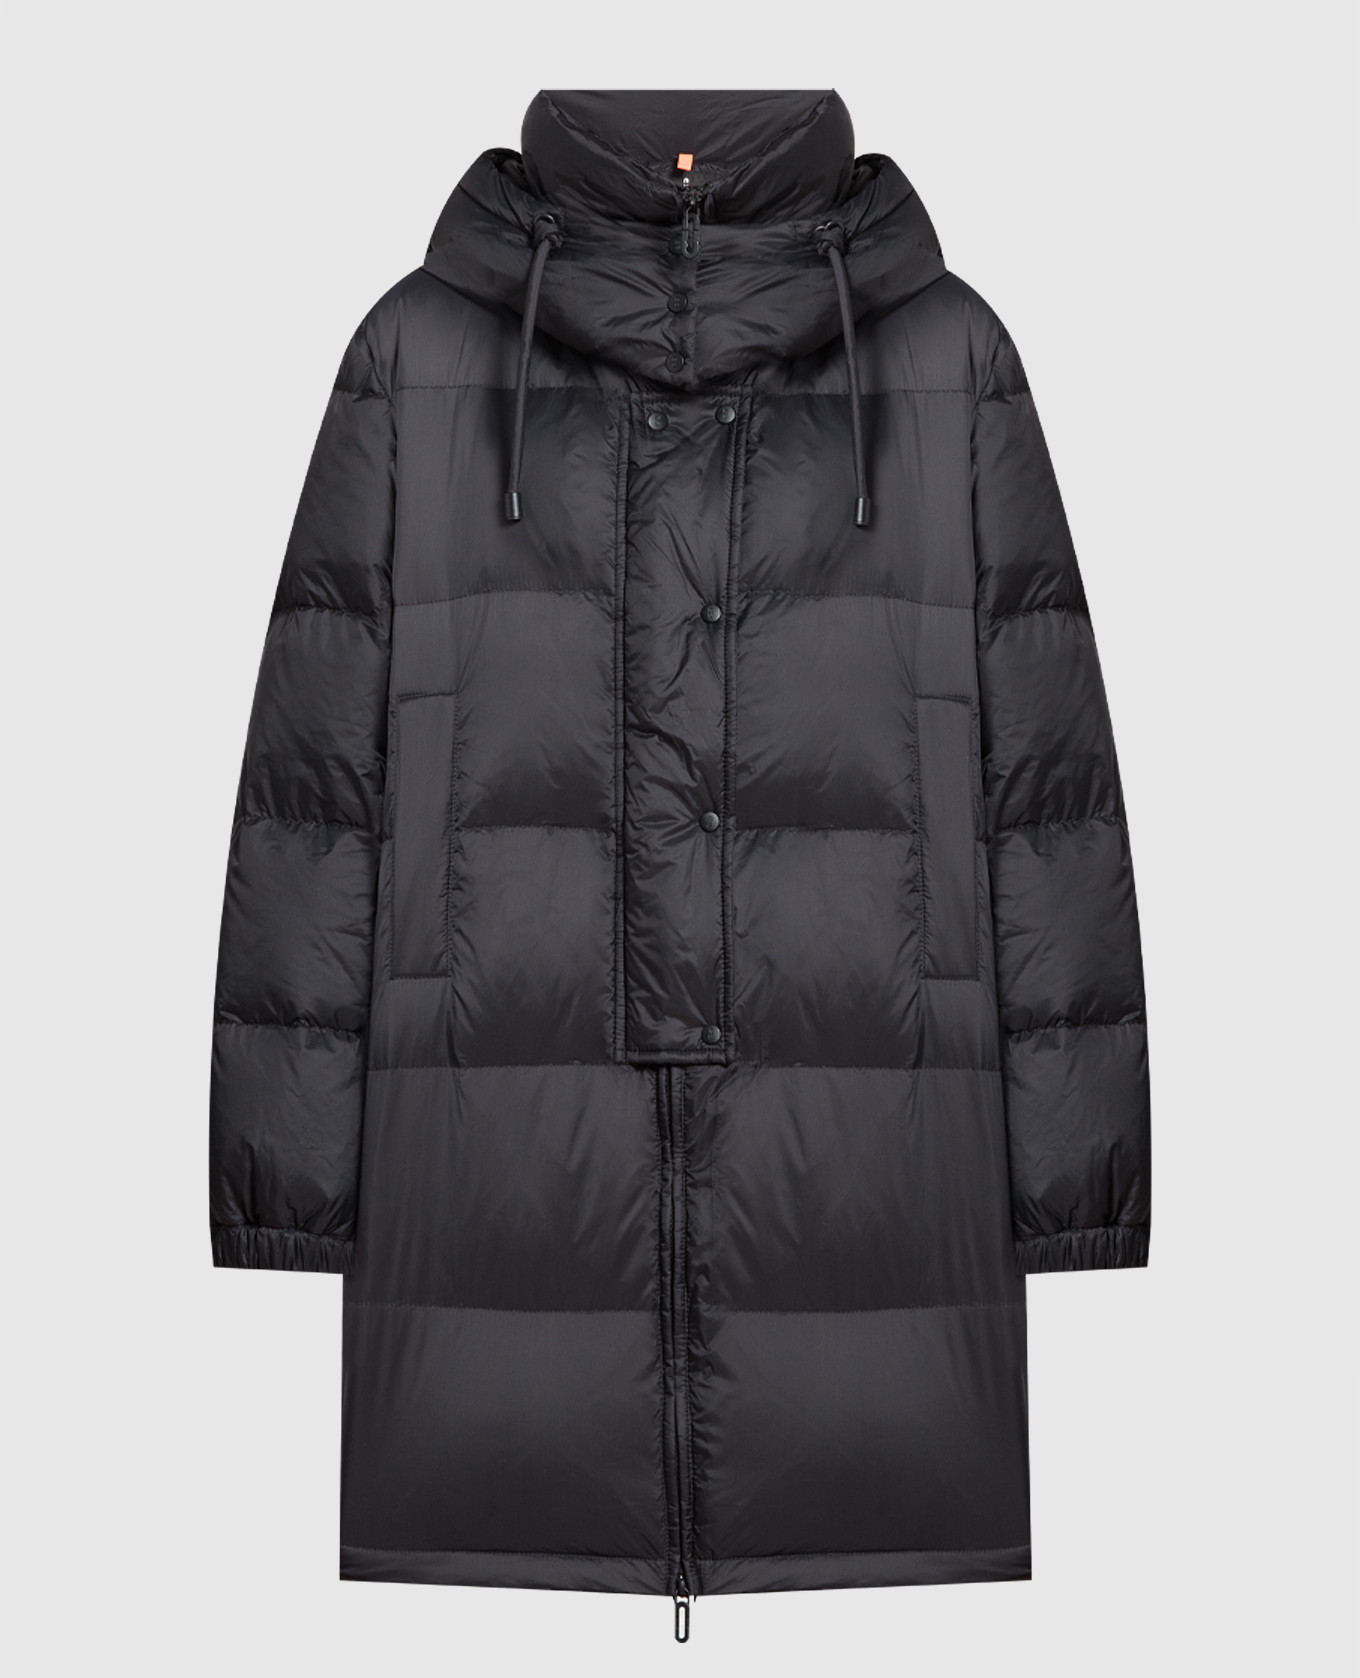 Black down jacket with logo